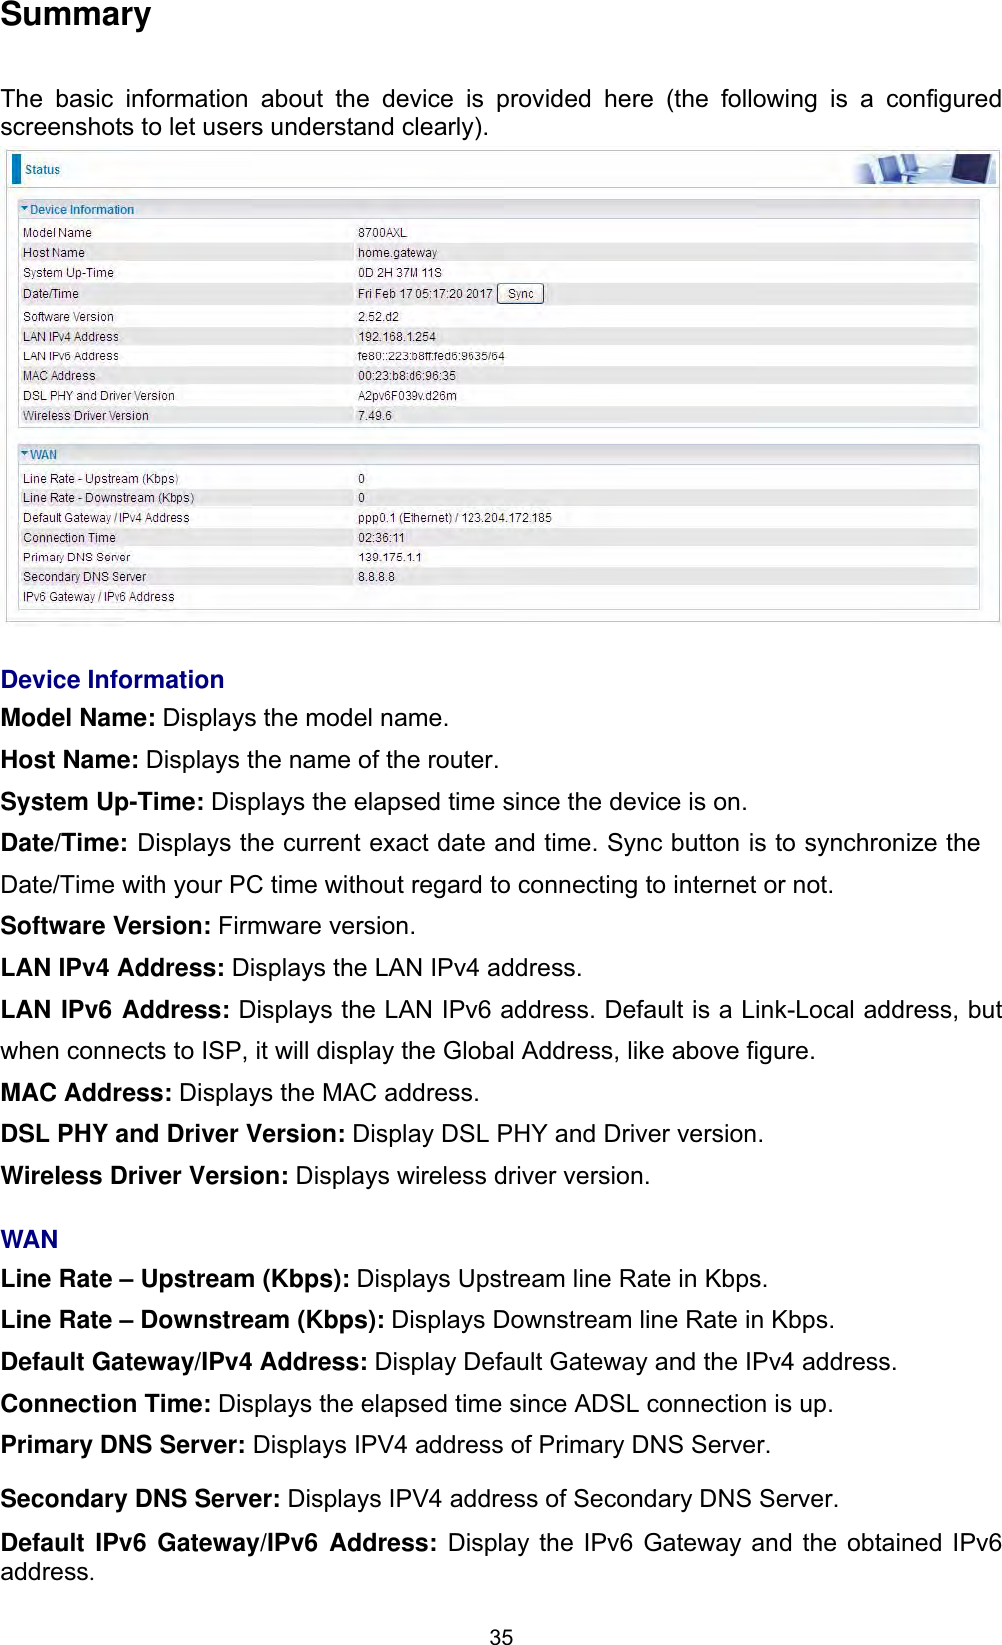 35SummaryThe basic information about the device is provided here (the following is a configured screenshots to let users understand clearly).  Device InformationModel Name: Displays the model name. Host Name: Displays the name of the router. System Up-Time: Displays the elapsed time since the device is on. Date/Time: Displays the current exact date and time. Sync button is to synchronize the Date/Time with your PC time without regard to connecting to internet or not. Software Version: Firmware version.LAN IPv4 Address: Displays the LAN IPv4 address. LAN IPv6 Address: Displays the LAN IPv6 address. Default is a Link-Local address, but when connects to ISP, it will display the Global Address, like above figure. MAC Address: Displays the MAC address. DSL PHY and Driver Version: Display DSL PHY and Driver version. Wireless Driver Version: Displays wireless driver version. WANLine Rate – Upstream (Kbps): Displays Upstream line Rate in Kbps. Line Rate – Downstream (Kbps): Displays Downstream line Rate in Kbps. Default Gateway/IPv4 Address: Display Default Gateway and the IPv4 address. Connection Time: Displays the elapsed time since ADSL connection is up. Primary DNS Server: Displays IPV4 address of Primary DNS Server. Secondary DNS Server: Displays IPV4 address of Secondary DNS Server. Default IPv6 Gateway/IPv6 Address: Display the IPv6 Gateway and the obtained IPv6 address.